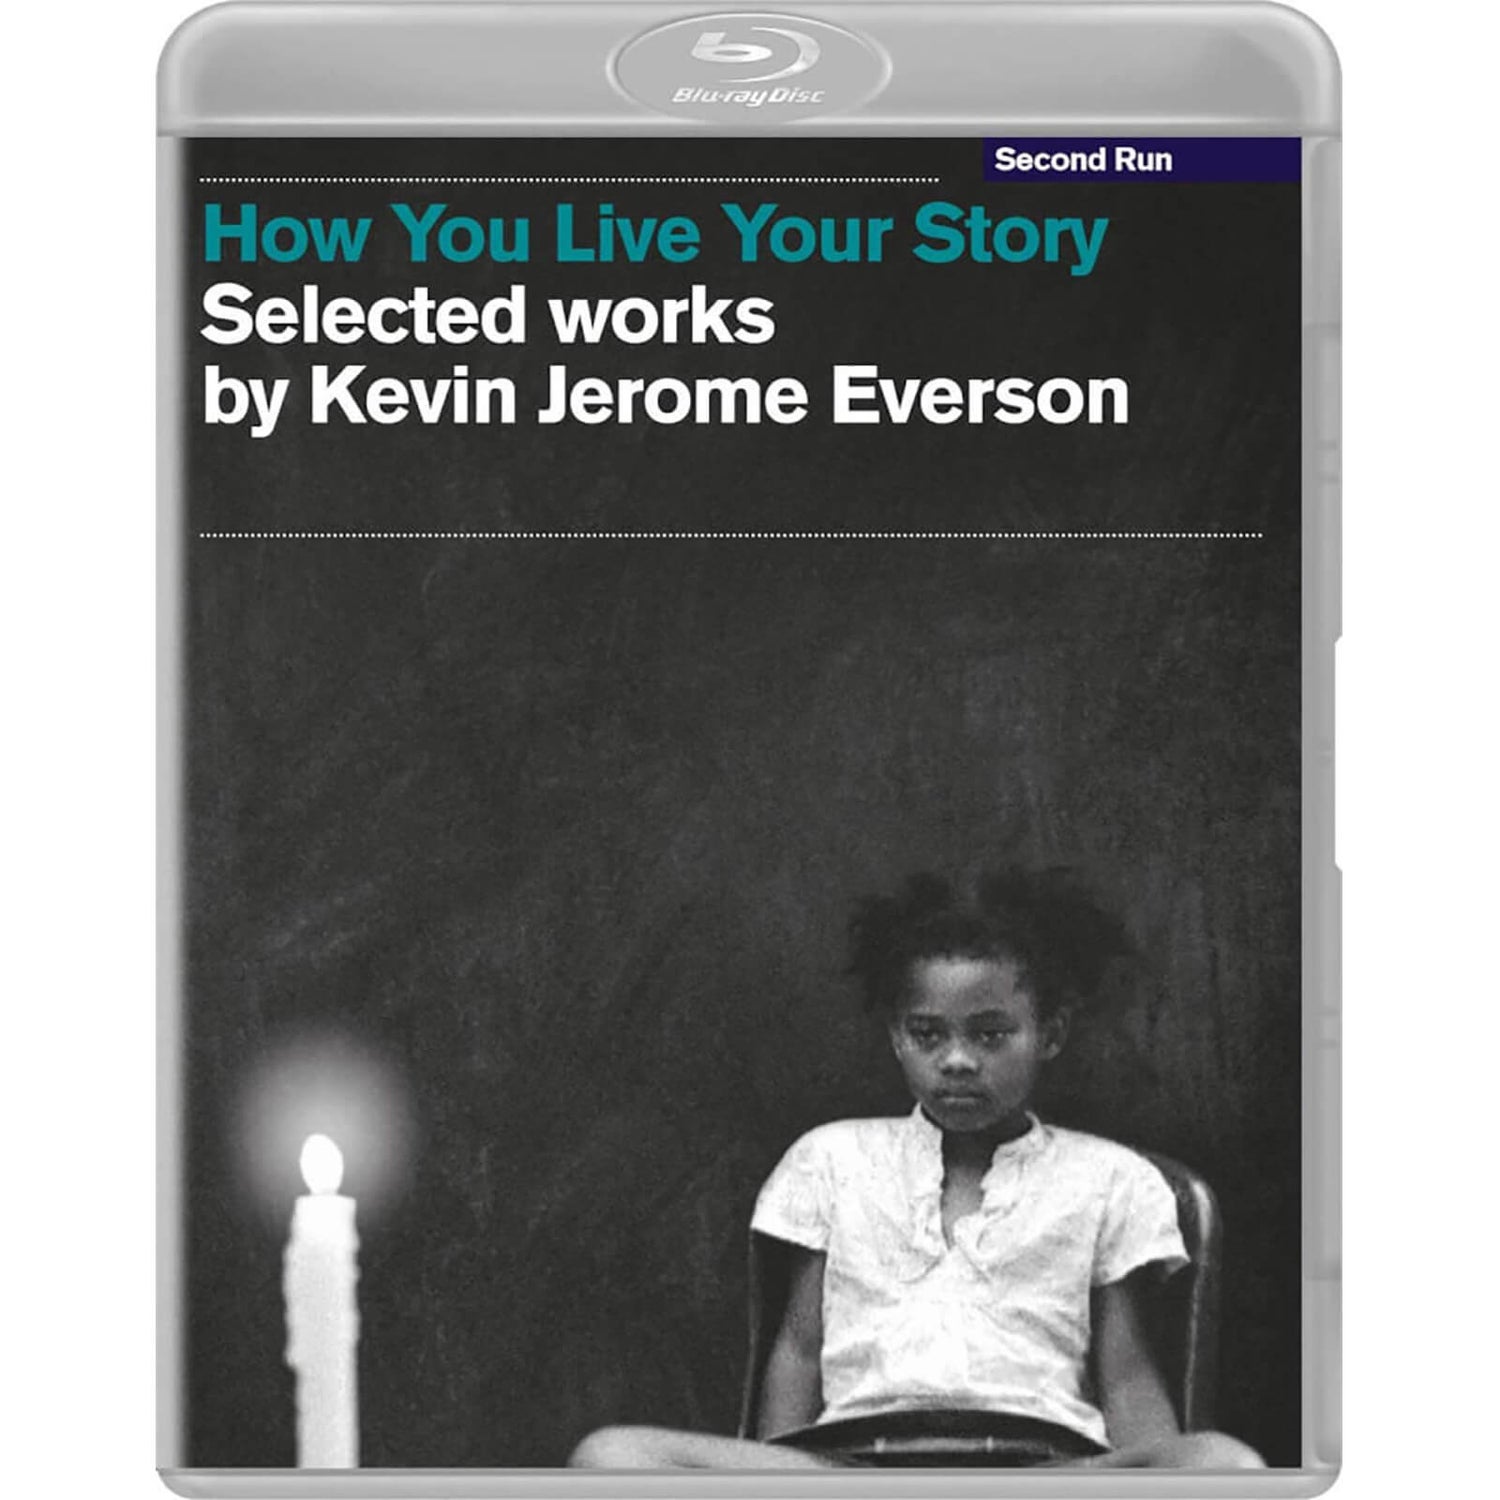 How You Live Your Story | Selected Works By Kevin Jerome Everson | Blu-ray